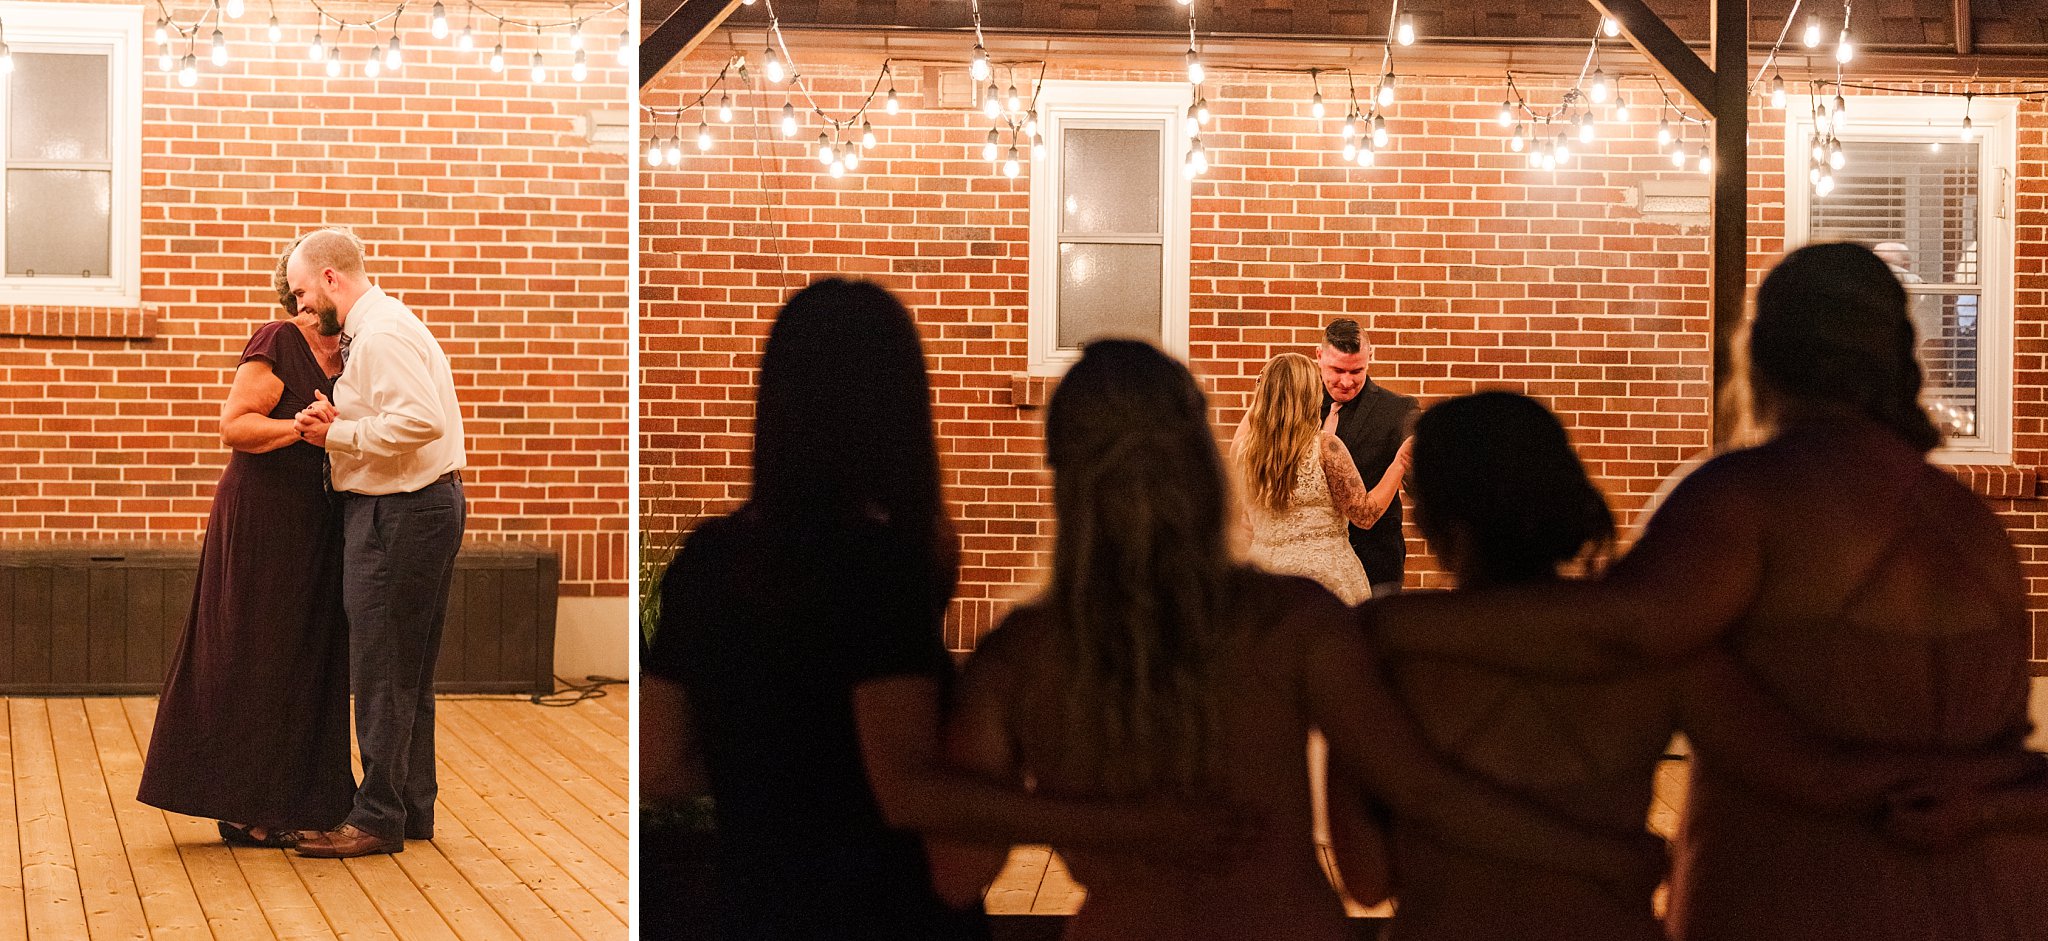 the bride dances with her brother while the bridesmaids watch from the foreground